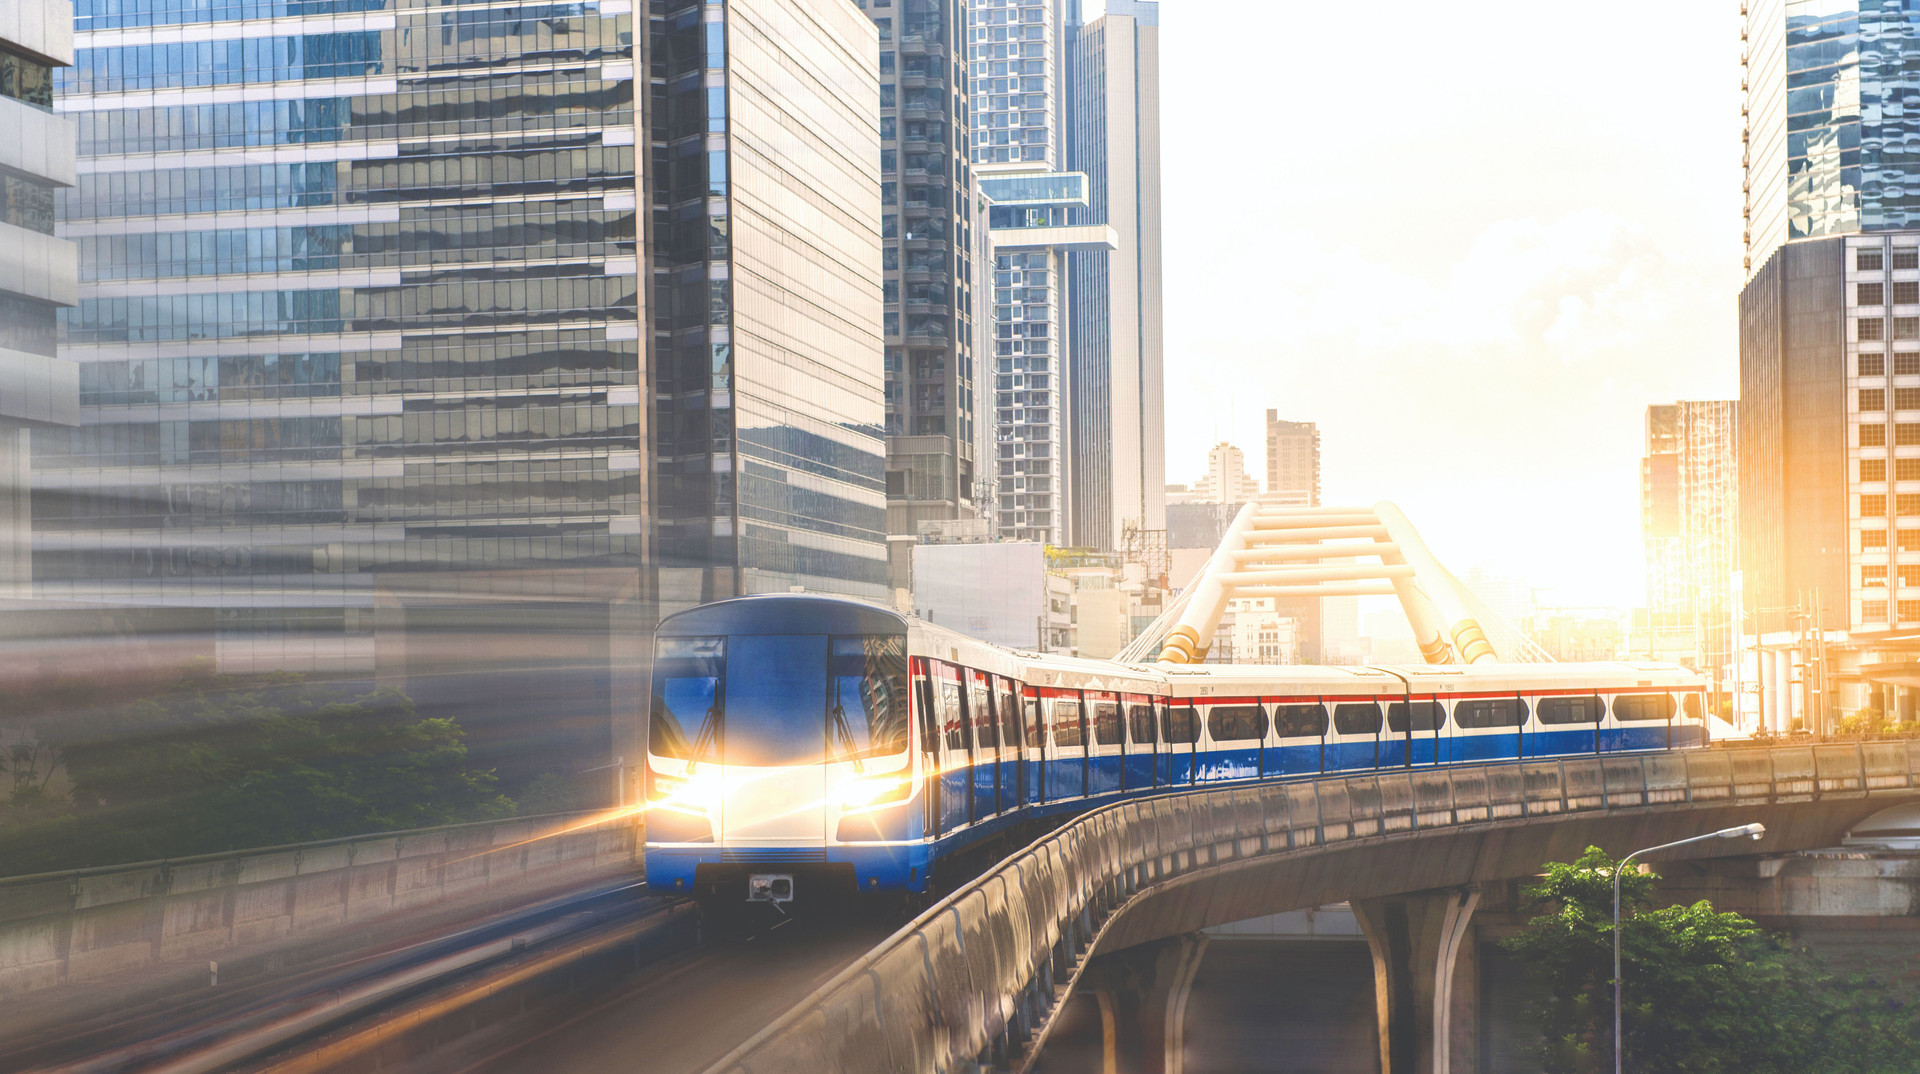 bts-skytrain-electric-train-running-way-with-business-office-buildings-background-compressed-1-.jpg